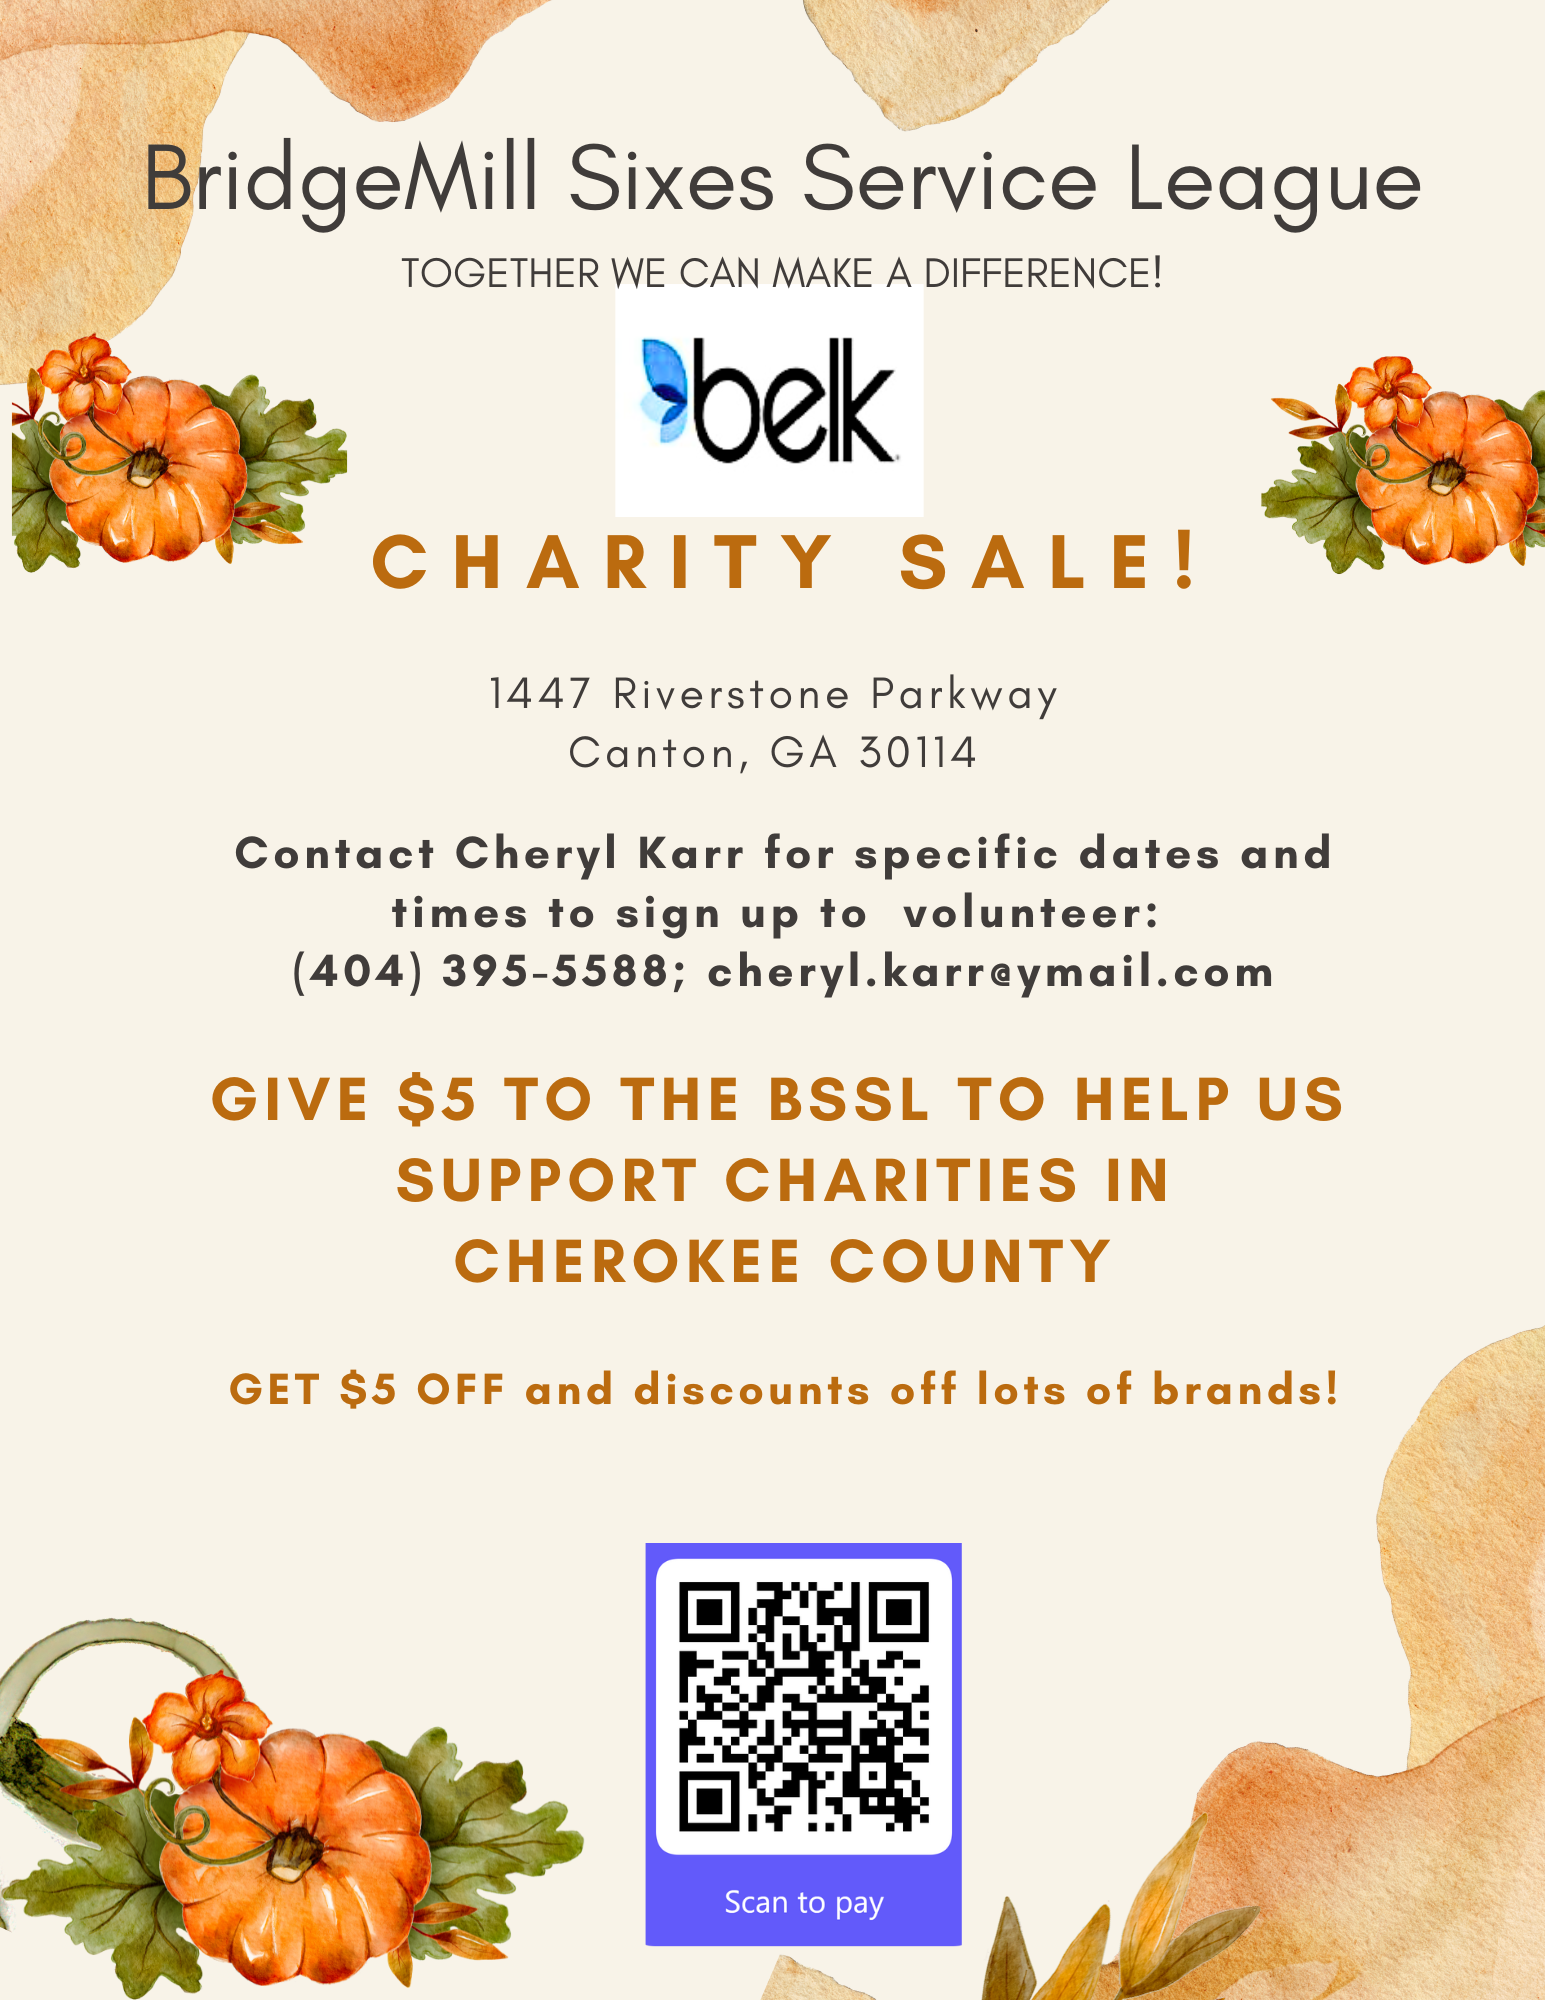 BSSL AND BELK CHARITY SALE Updated Flyer